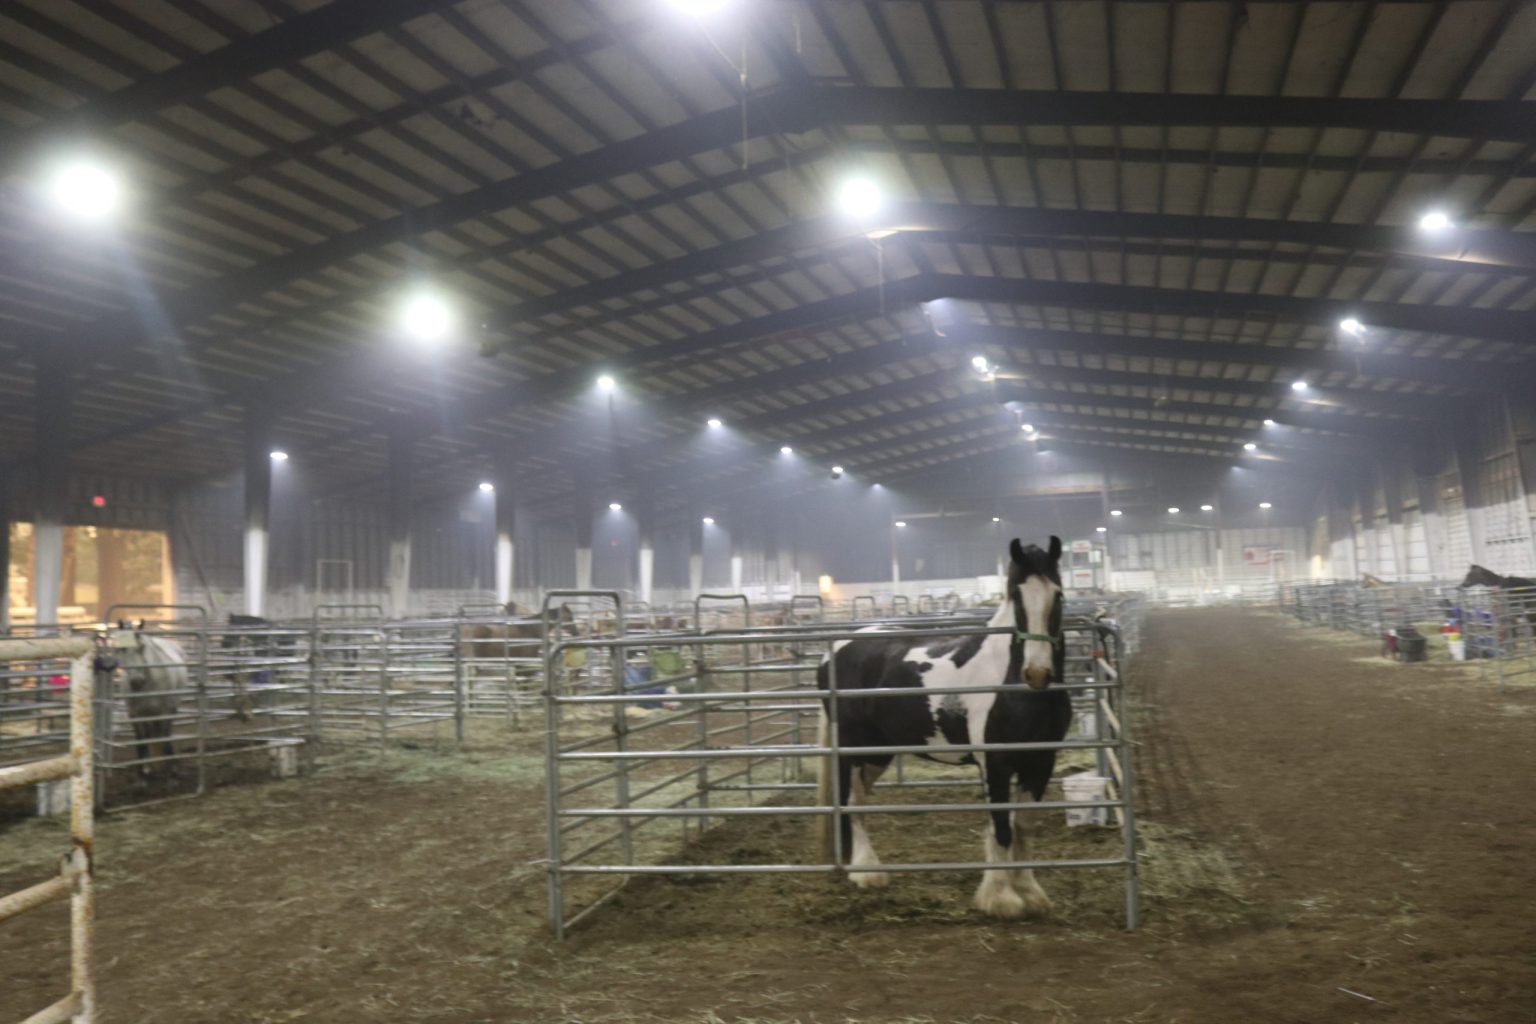 Thousands Of Animals Sheltered At Fairgrounds Across Oregon During Fires